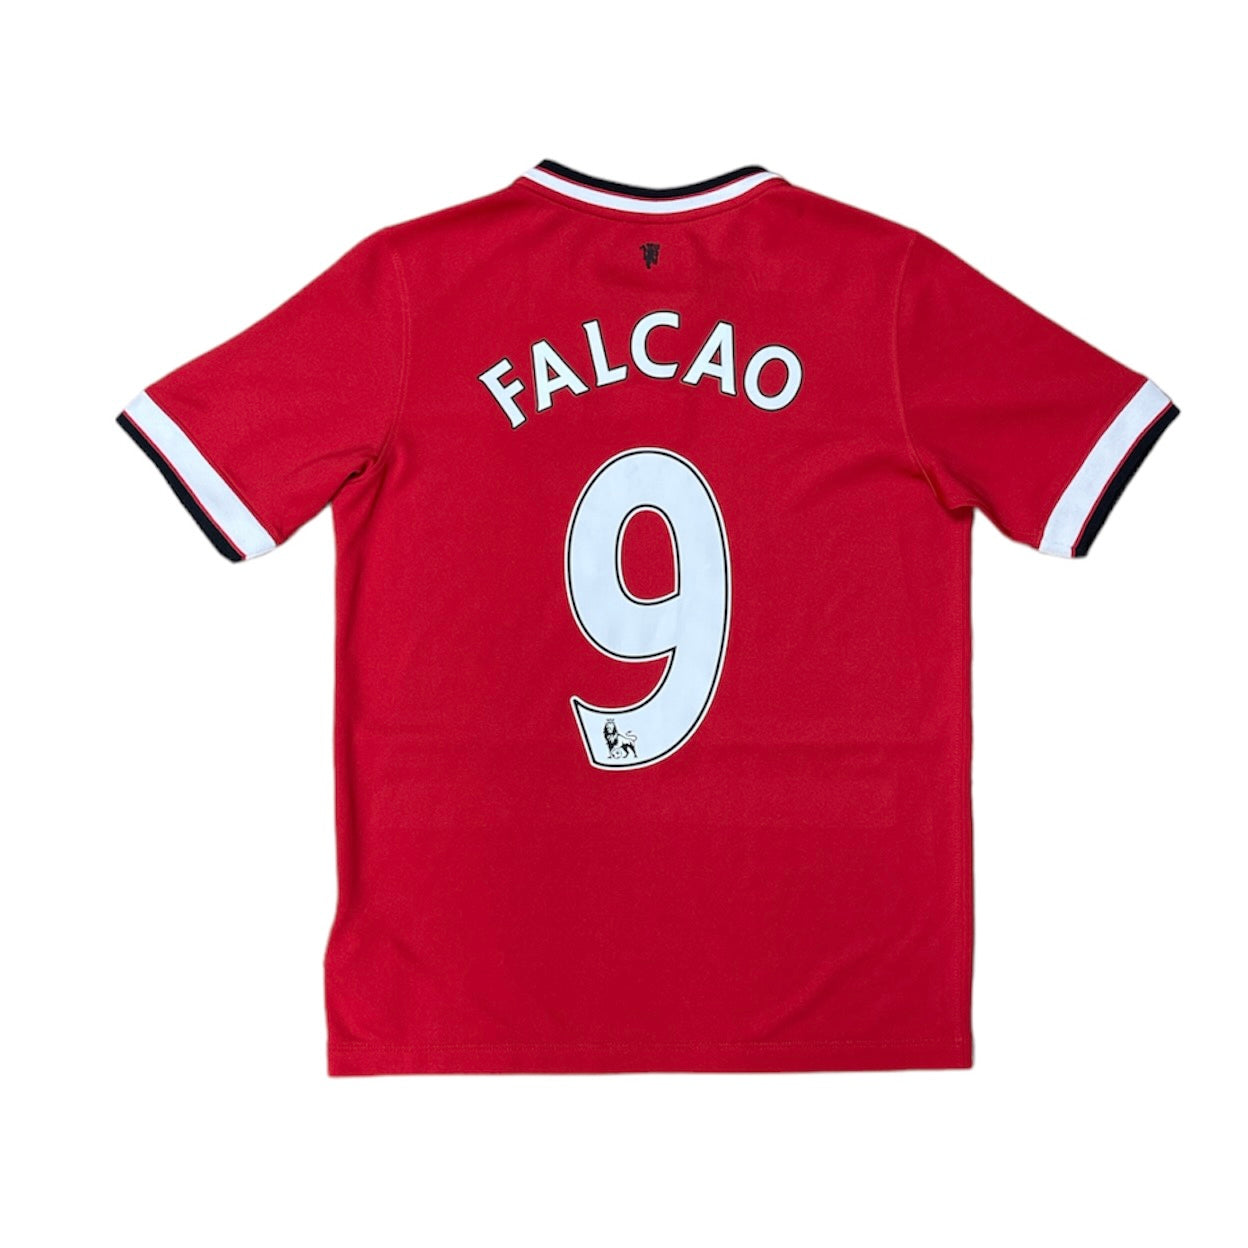 Nike Manchester United Falcao 2014/2015 Home Football Jersey (Youth)